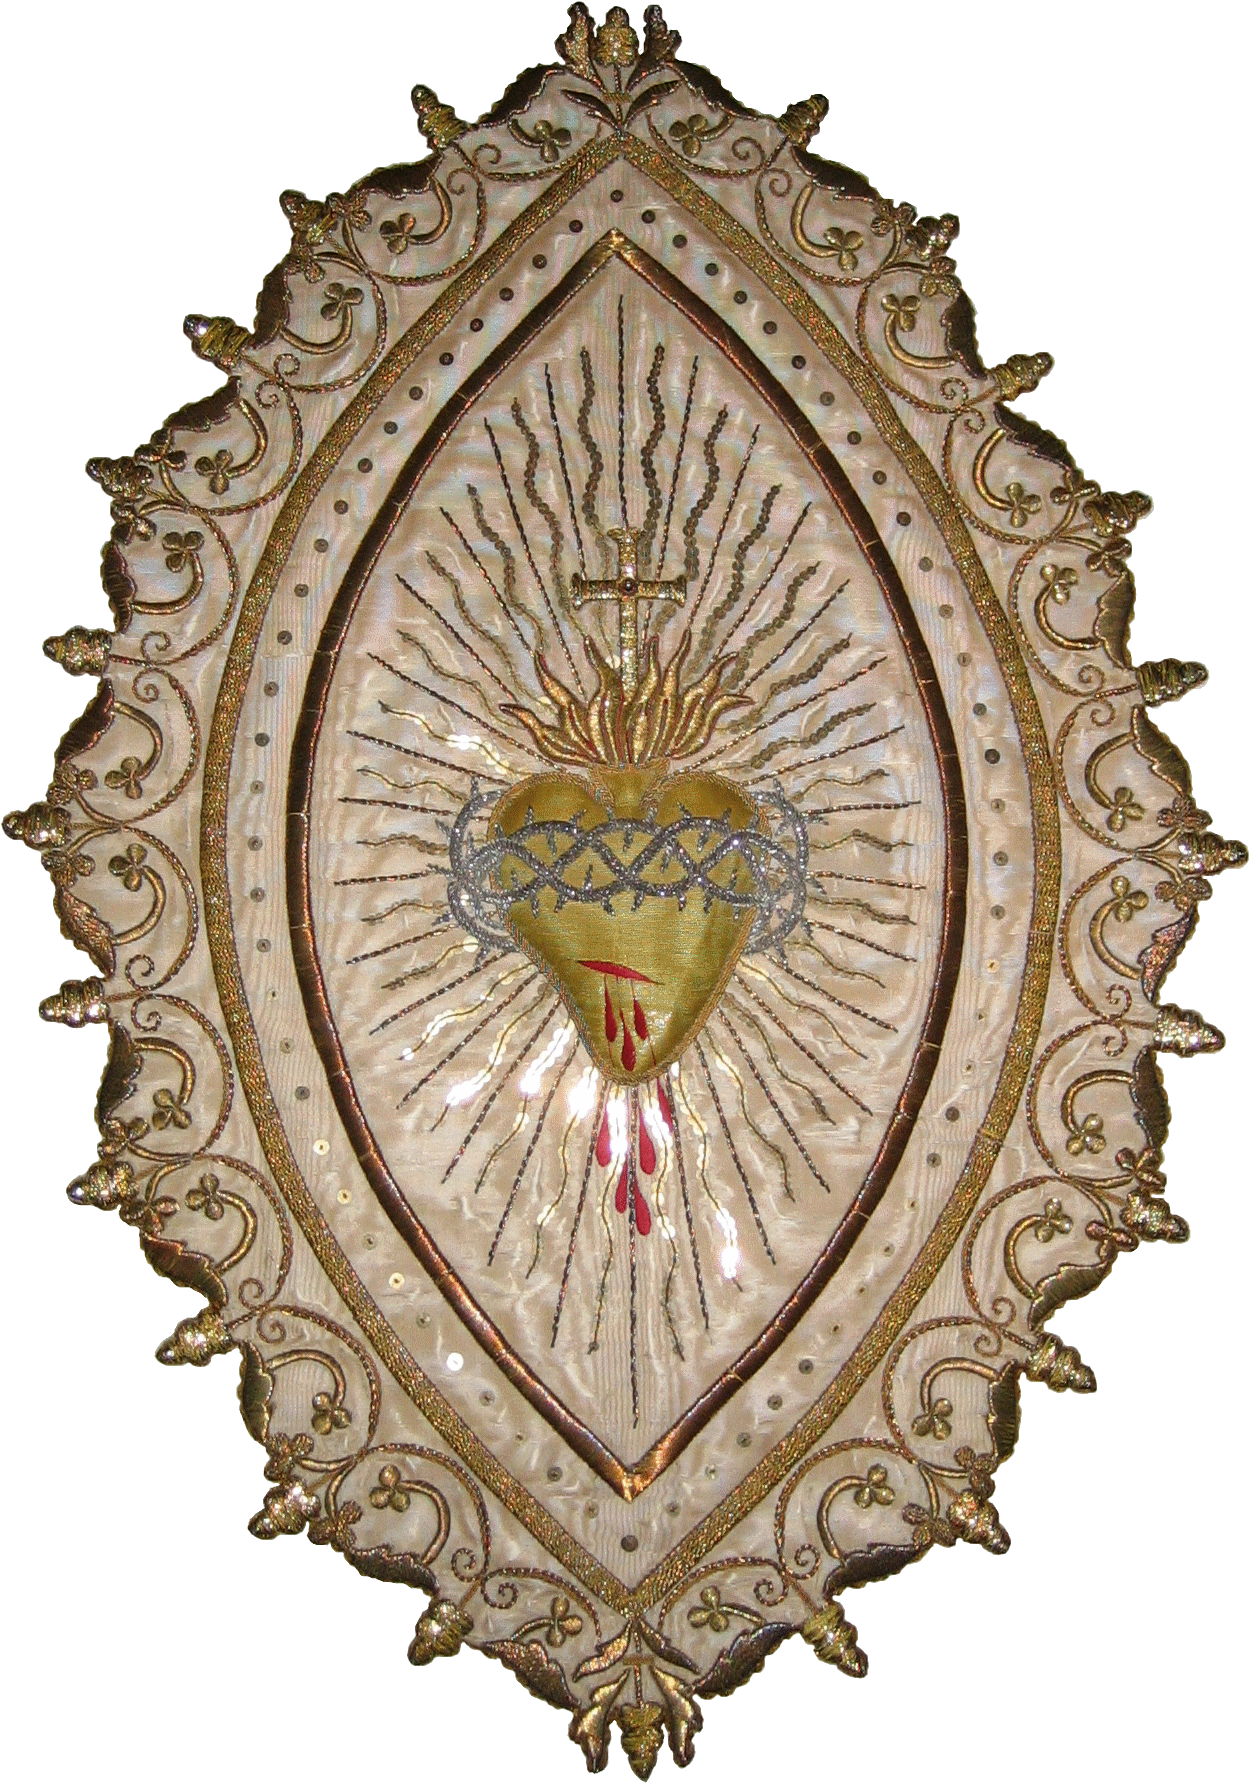 Related Image Sacred Heart - Related Image Sacred Heart (1273x1813)